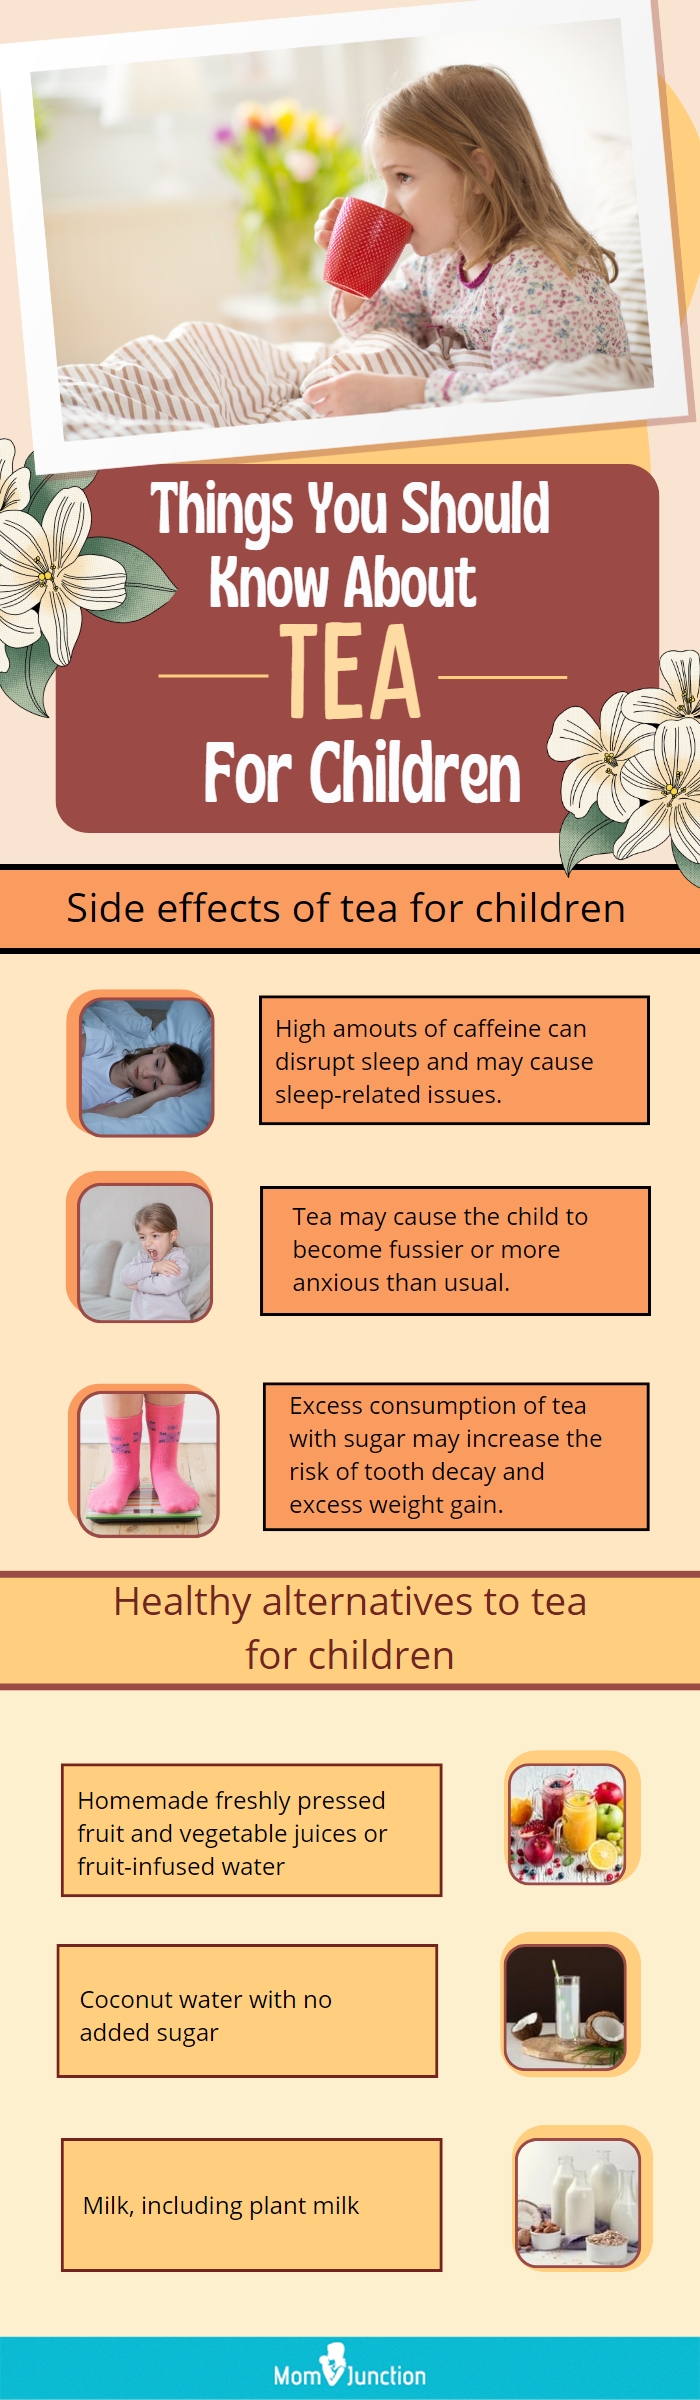 things you should know about tea for children (infographic)